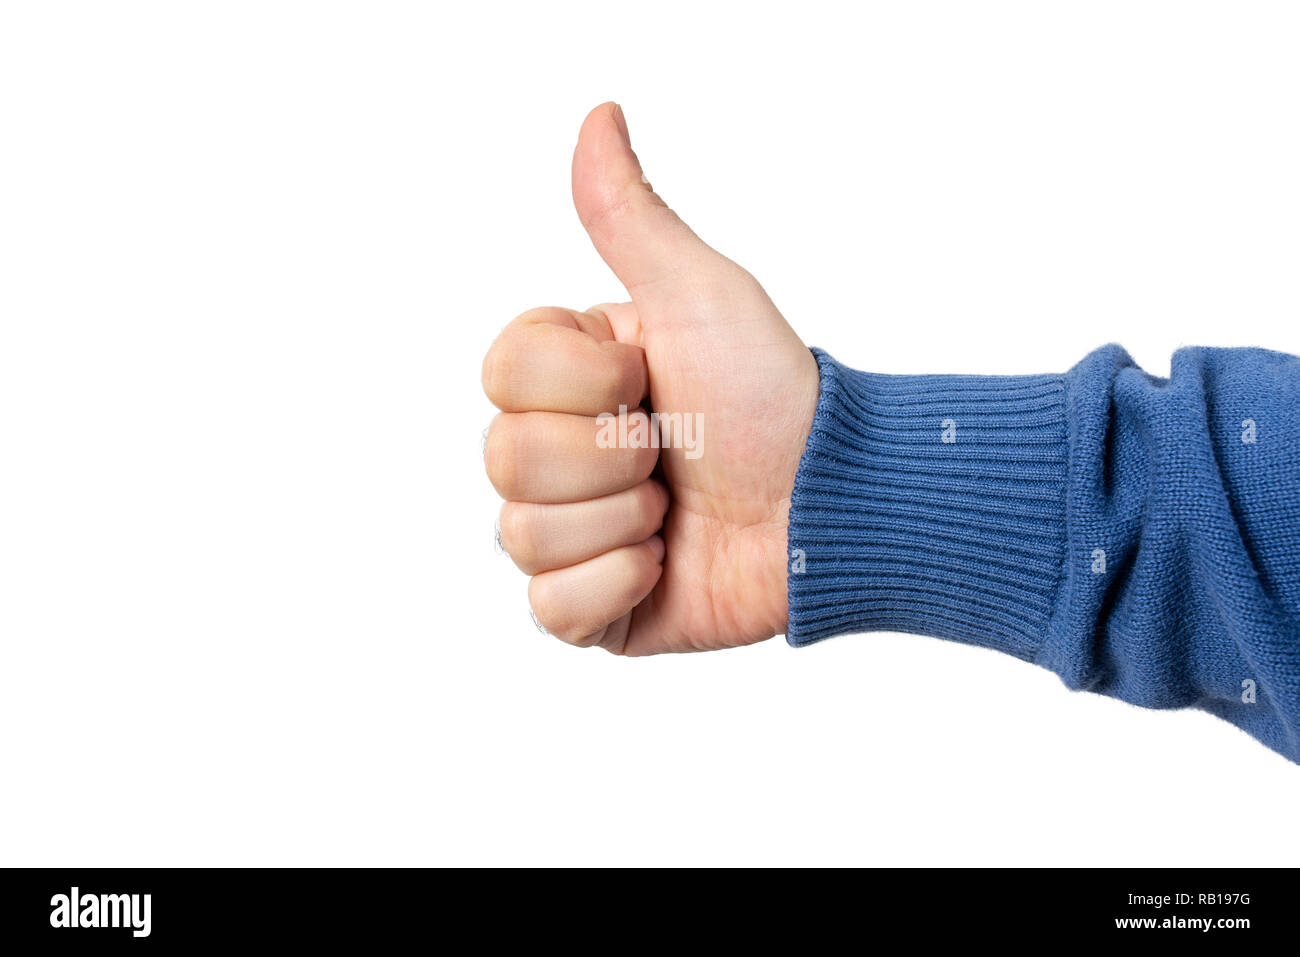 Male hand with thumbs up sign, isolated on white background. Stock Photo